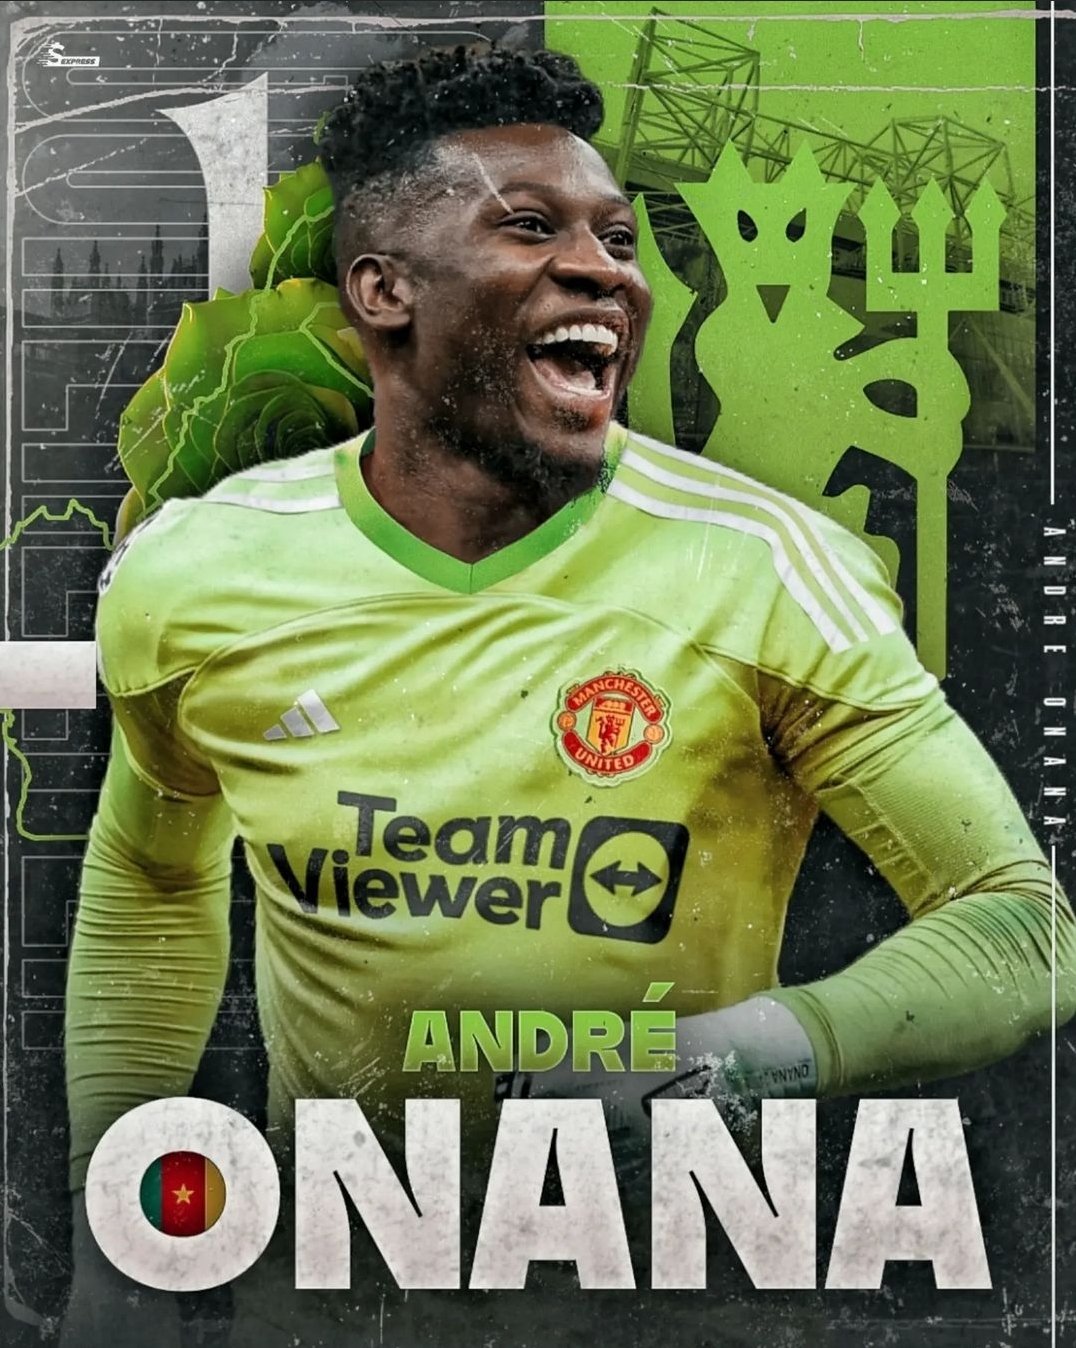 JUST IN: Man United Sign £45m deal with Inter for Andre Onana